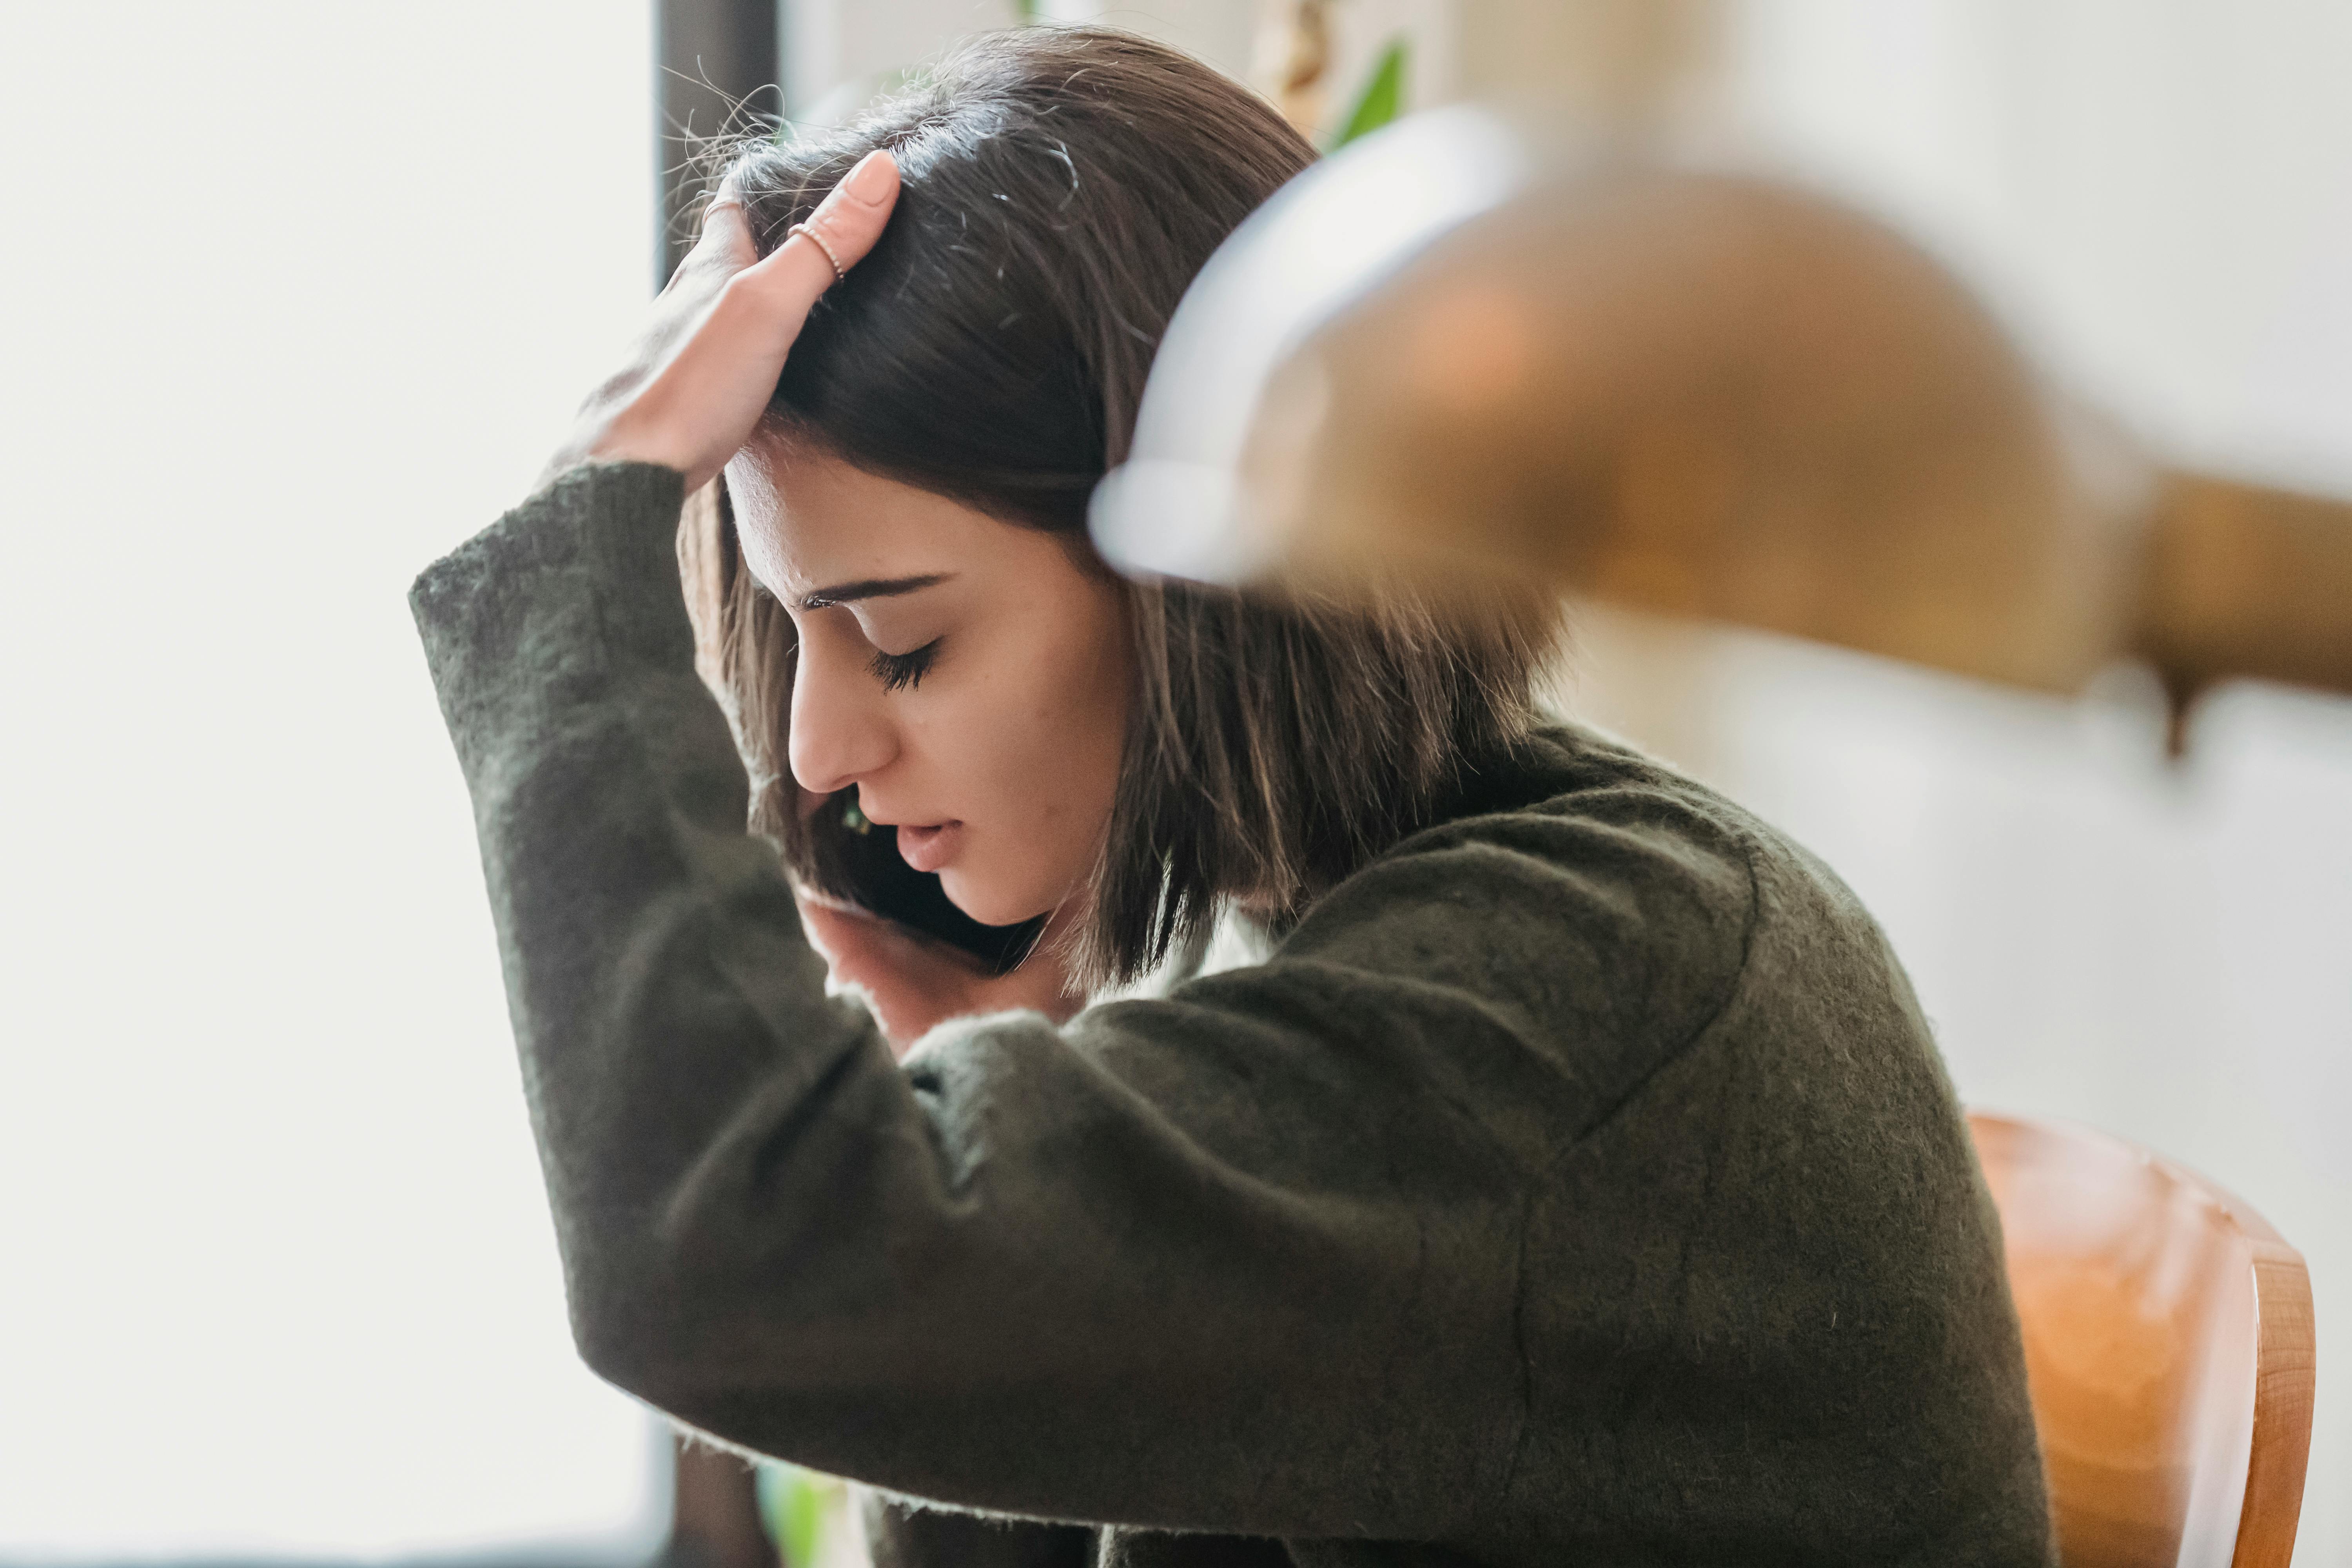 A disappointed young woman talking on the phone | Source: Pexels